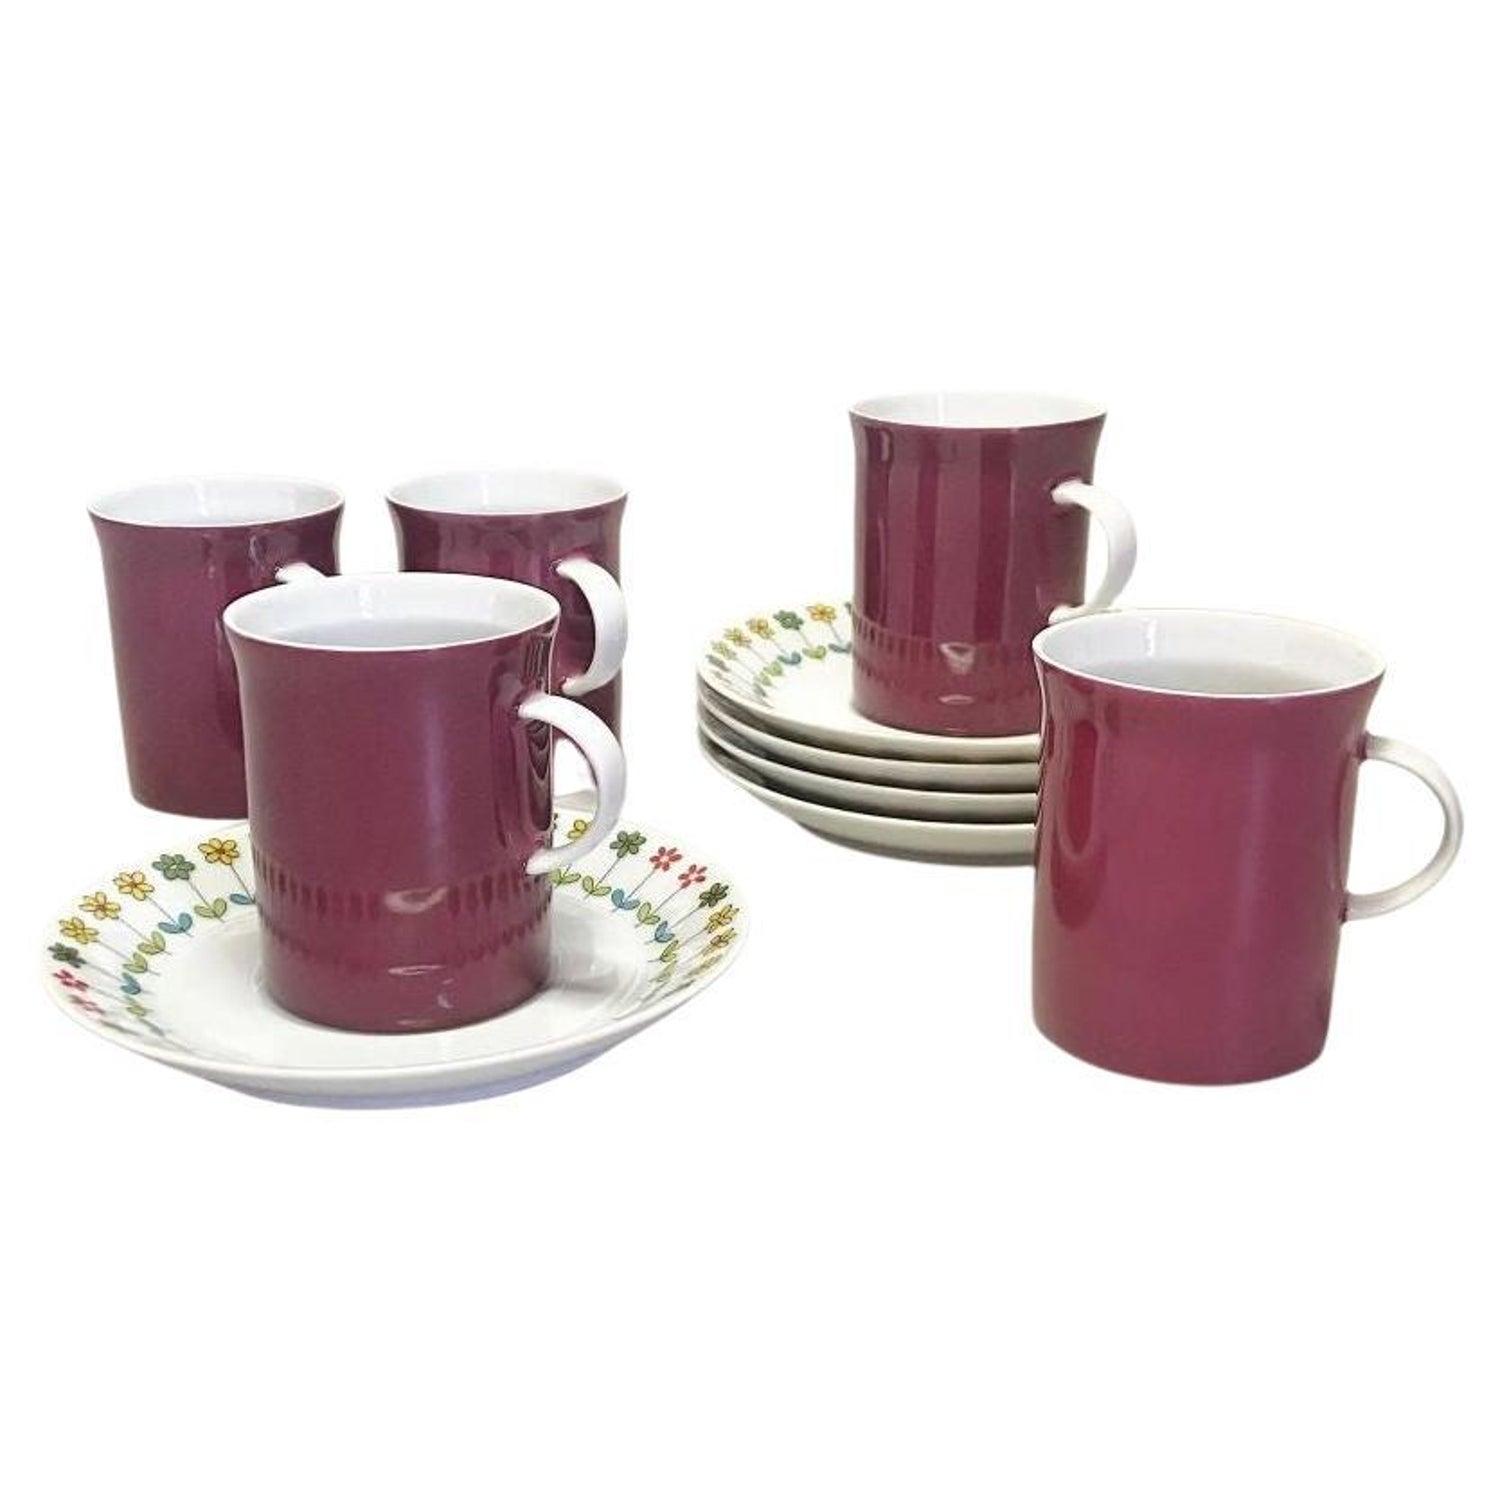 https://a.1stdibscdn.com/1960s-secunda-purple-tea-cups-with-piemonte-saucers-for-rosenthal-studio-10-pc-for-sale/22569652/f_357038721692014611654/f_35703872_1692014611879_bg_processed.jpg?width=1500